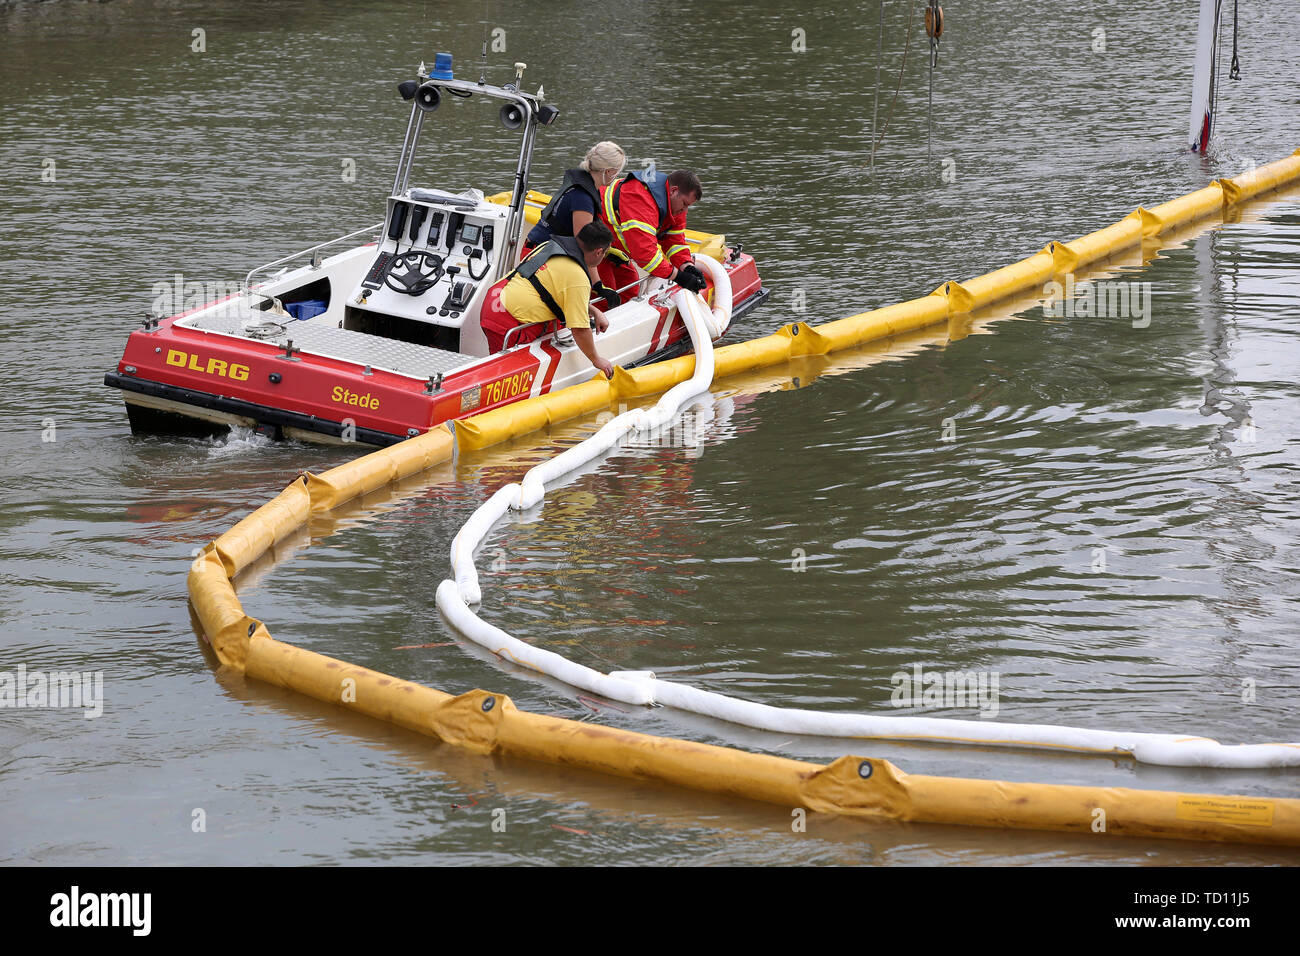 Stadersand, Germany. 11th June, 2019. Emergency forces lay new oil barriers around the sunken historic sailing ship 'No 5 Elbe' in the harbour of Stadersand. Operating fluids had leaked from the hull of the sailing ship, and the fire brigade was on site with the support of the German Federal Agency for Technical Relief and the German Aerospace Center (DLRG). The historic sailing ship, which has only recently been extensively renovated, collided with a container ship on the Elbe and sank. Credit: Bodo Marks/dpa/Alamy Live News Stock Photo